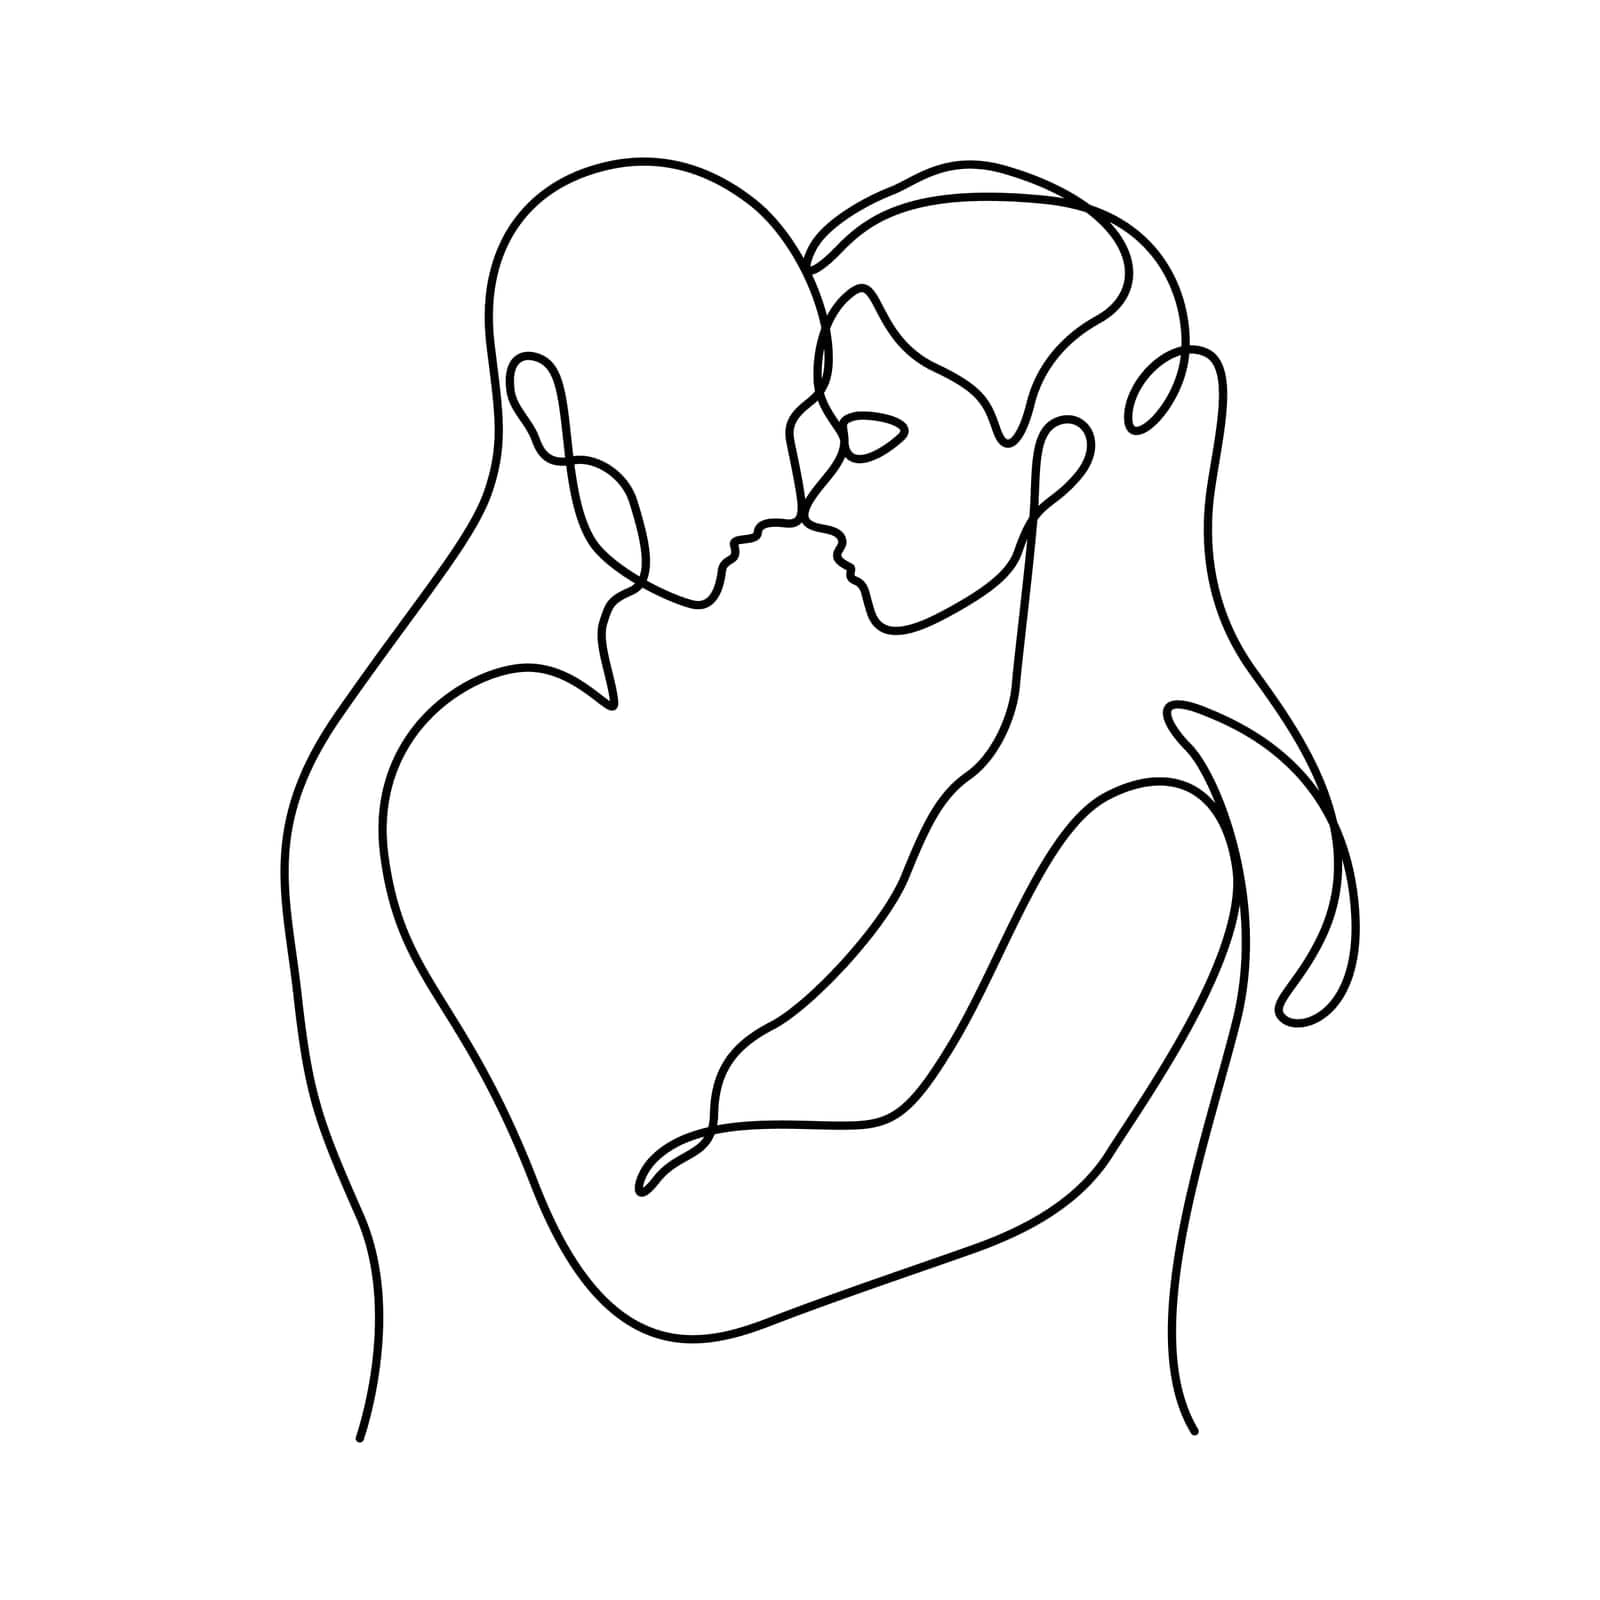 romance couple line art in one line drawing vector illustration